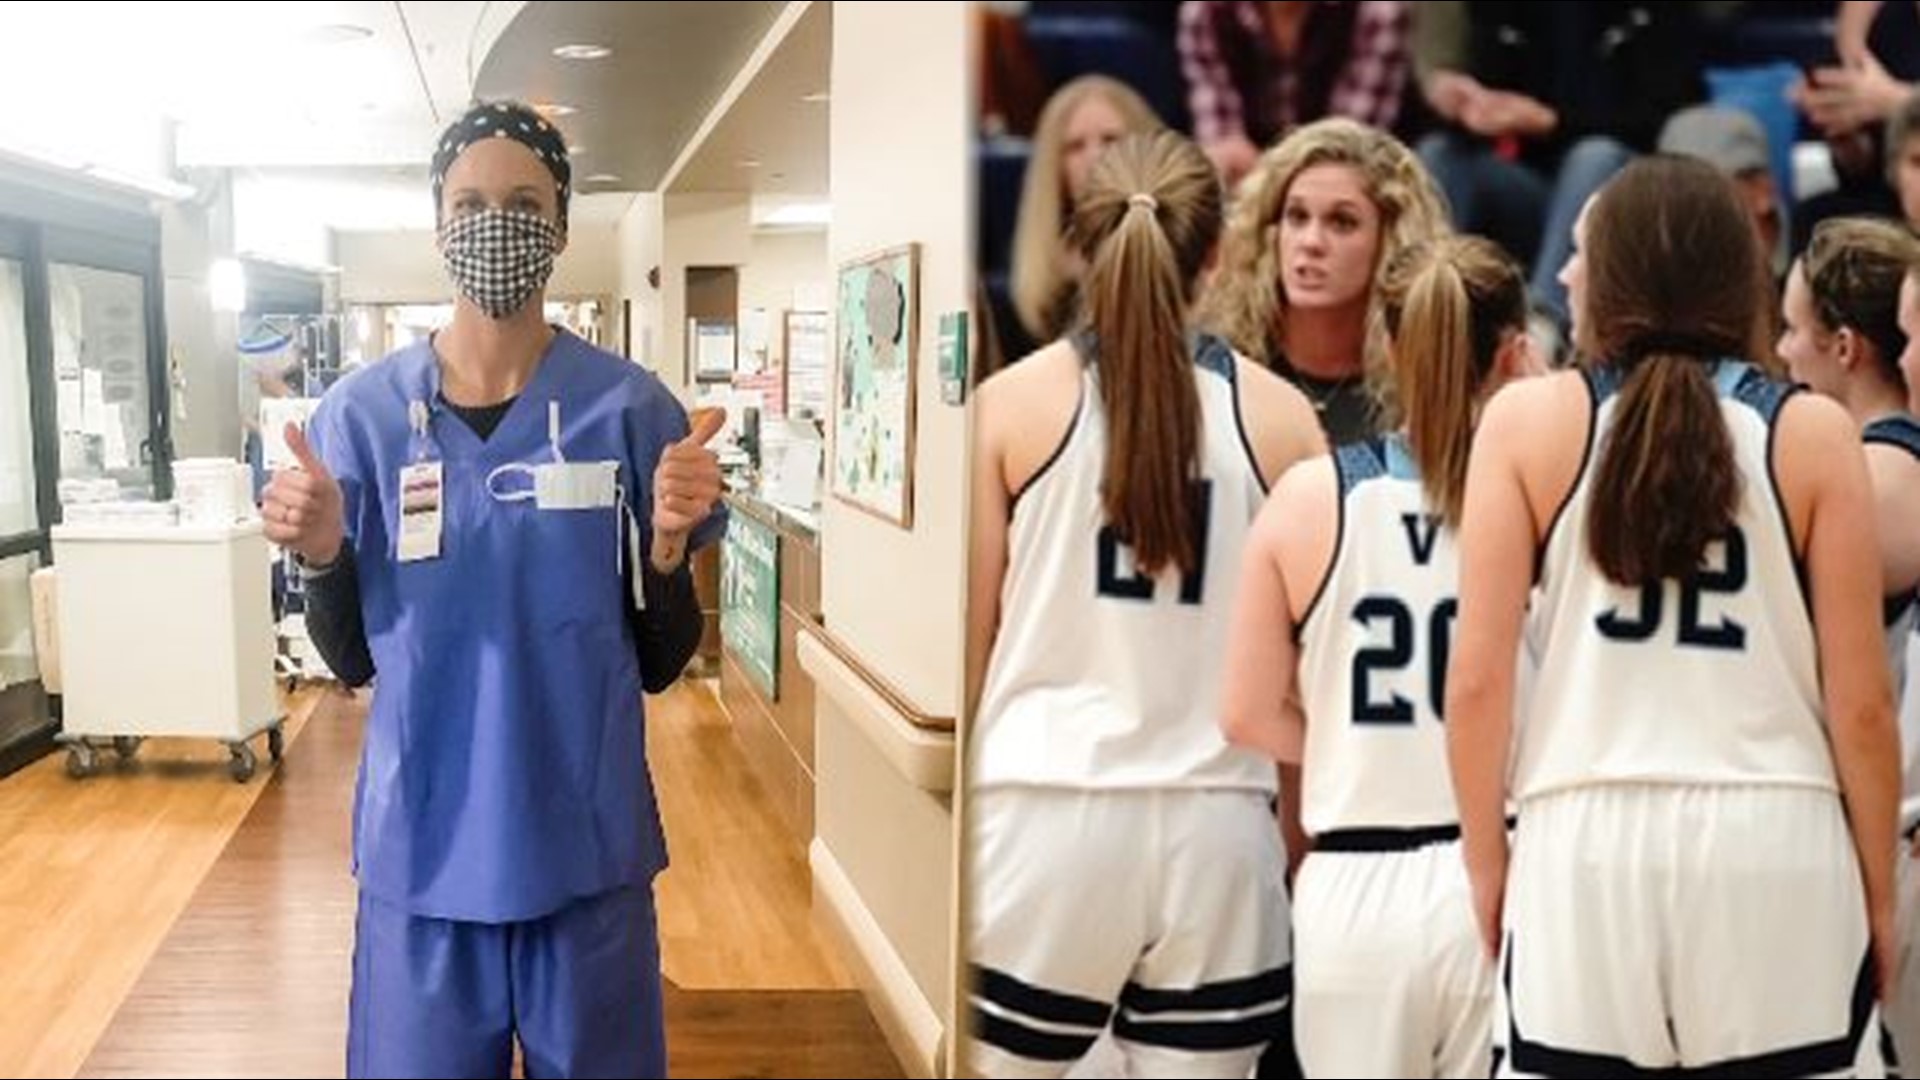 Brooke Jelniker has been assisting the Valor Christian girls basketball team for the past four years. Now, as a nursing assistant, she's helping in a COVID-19 unit.